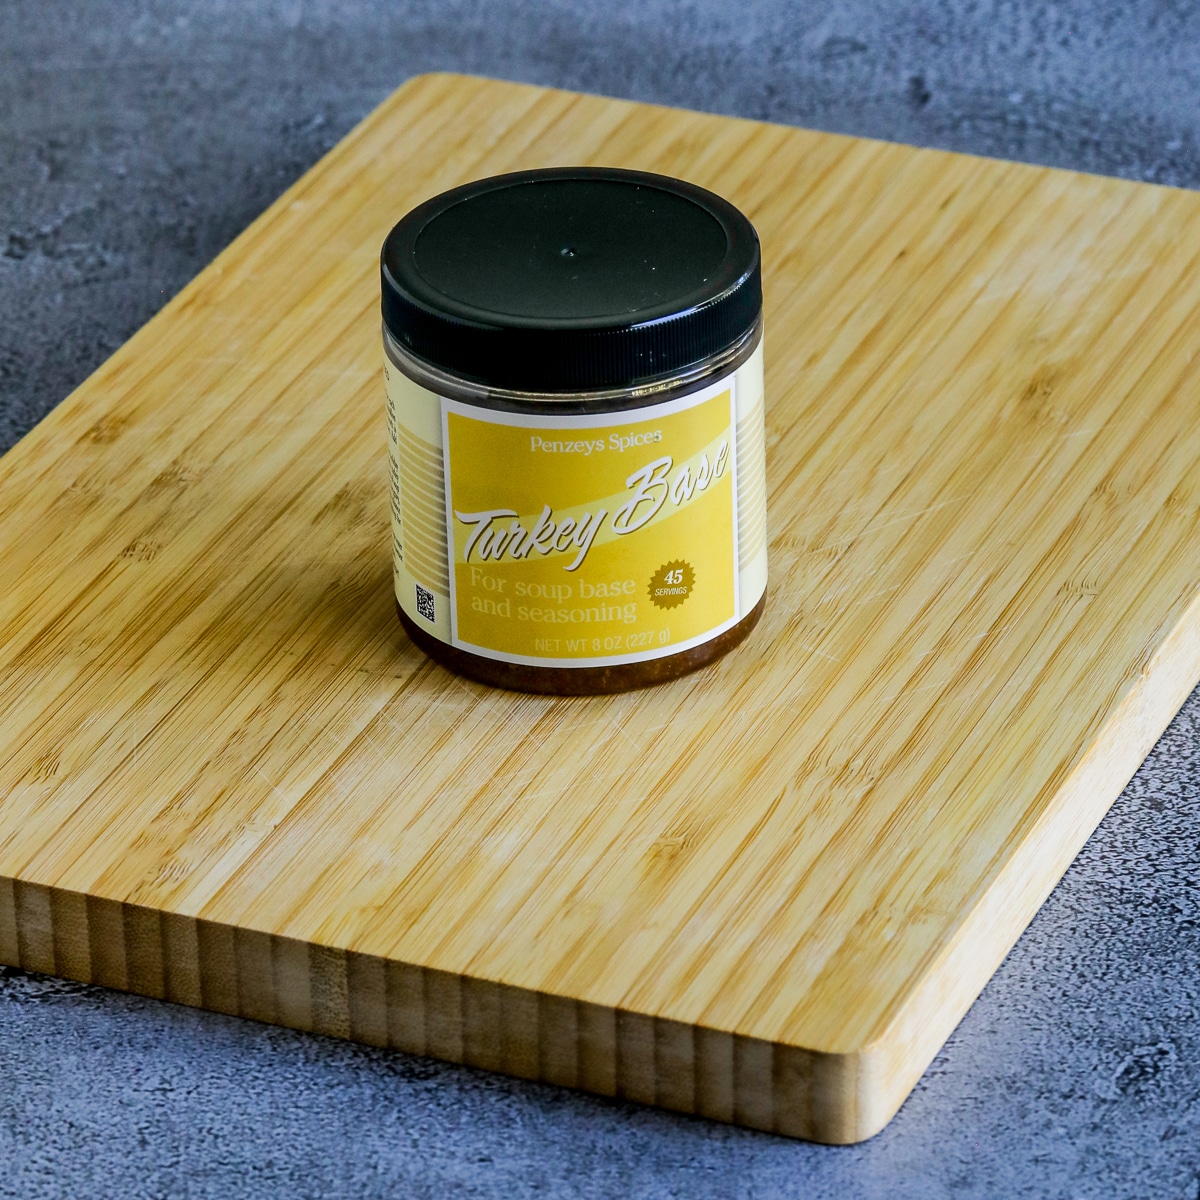 Square image for Kalyn's Kitchen Picks: Penzey's Turkey Base shown on cutting board.